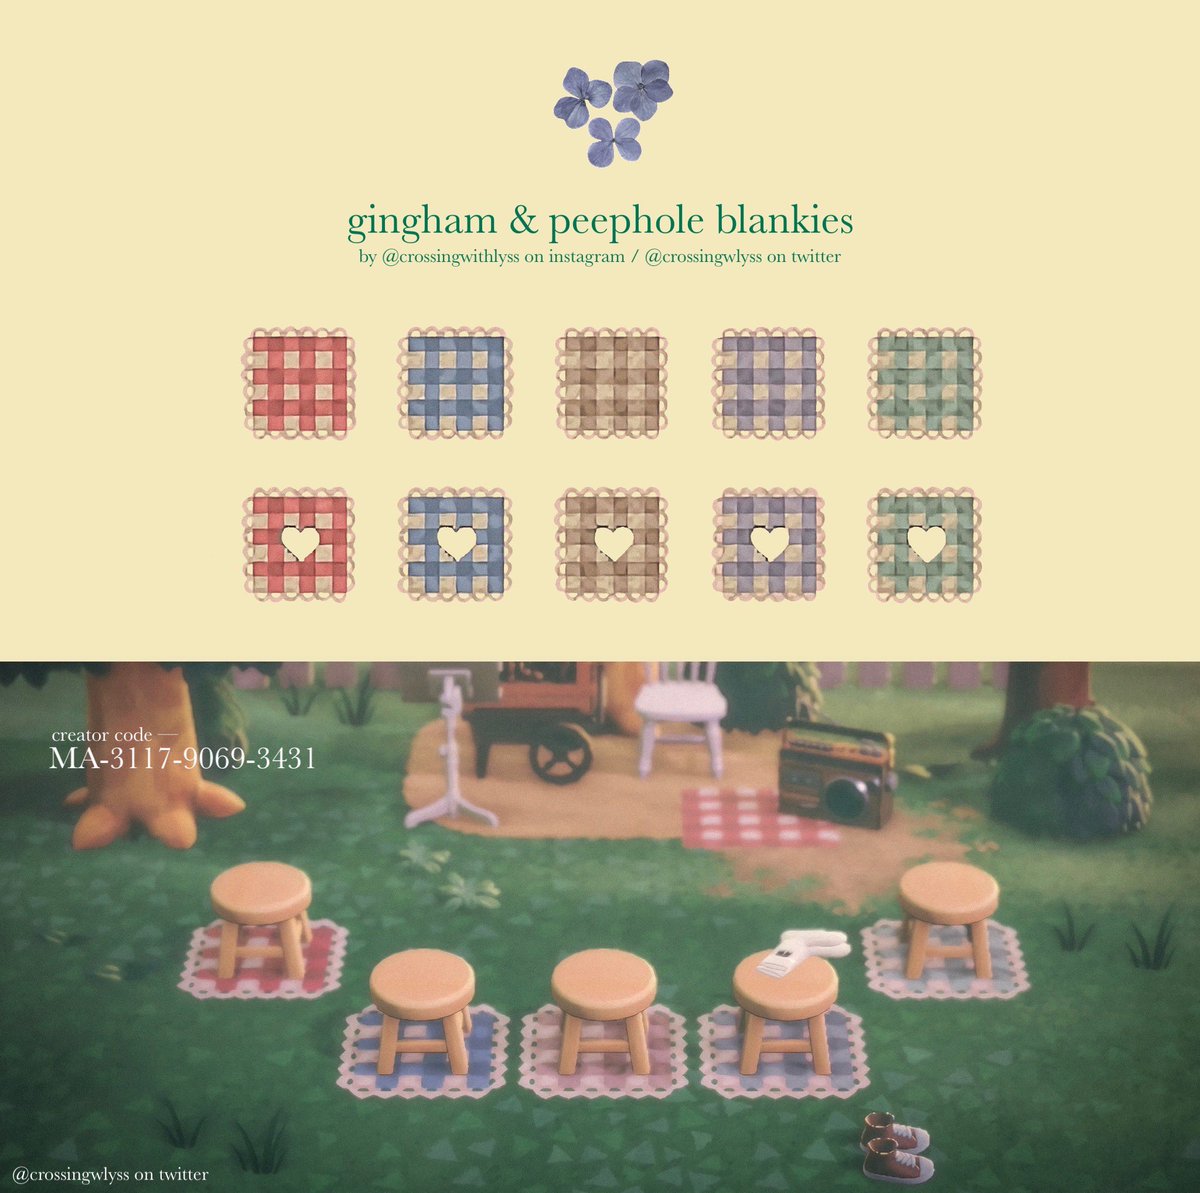 new design! some cute blanket codes perfect for a summer picnic 🧺
——
#ACNHDesign #acnhcodes #AnimalCrossingNewHorizons